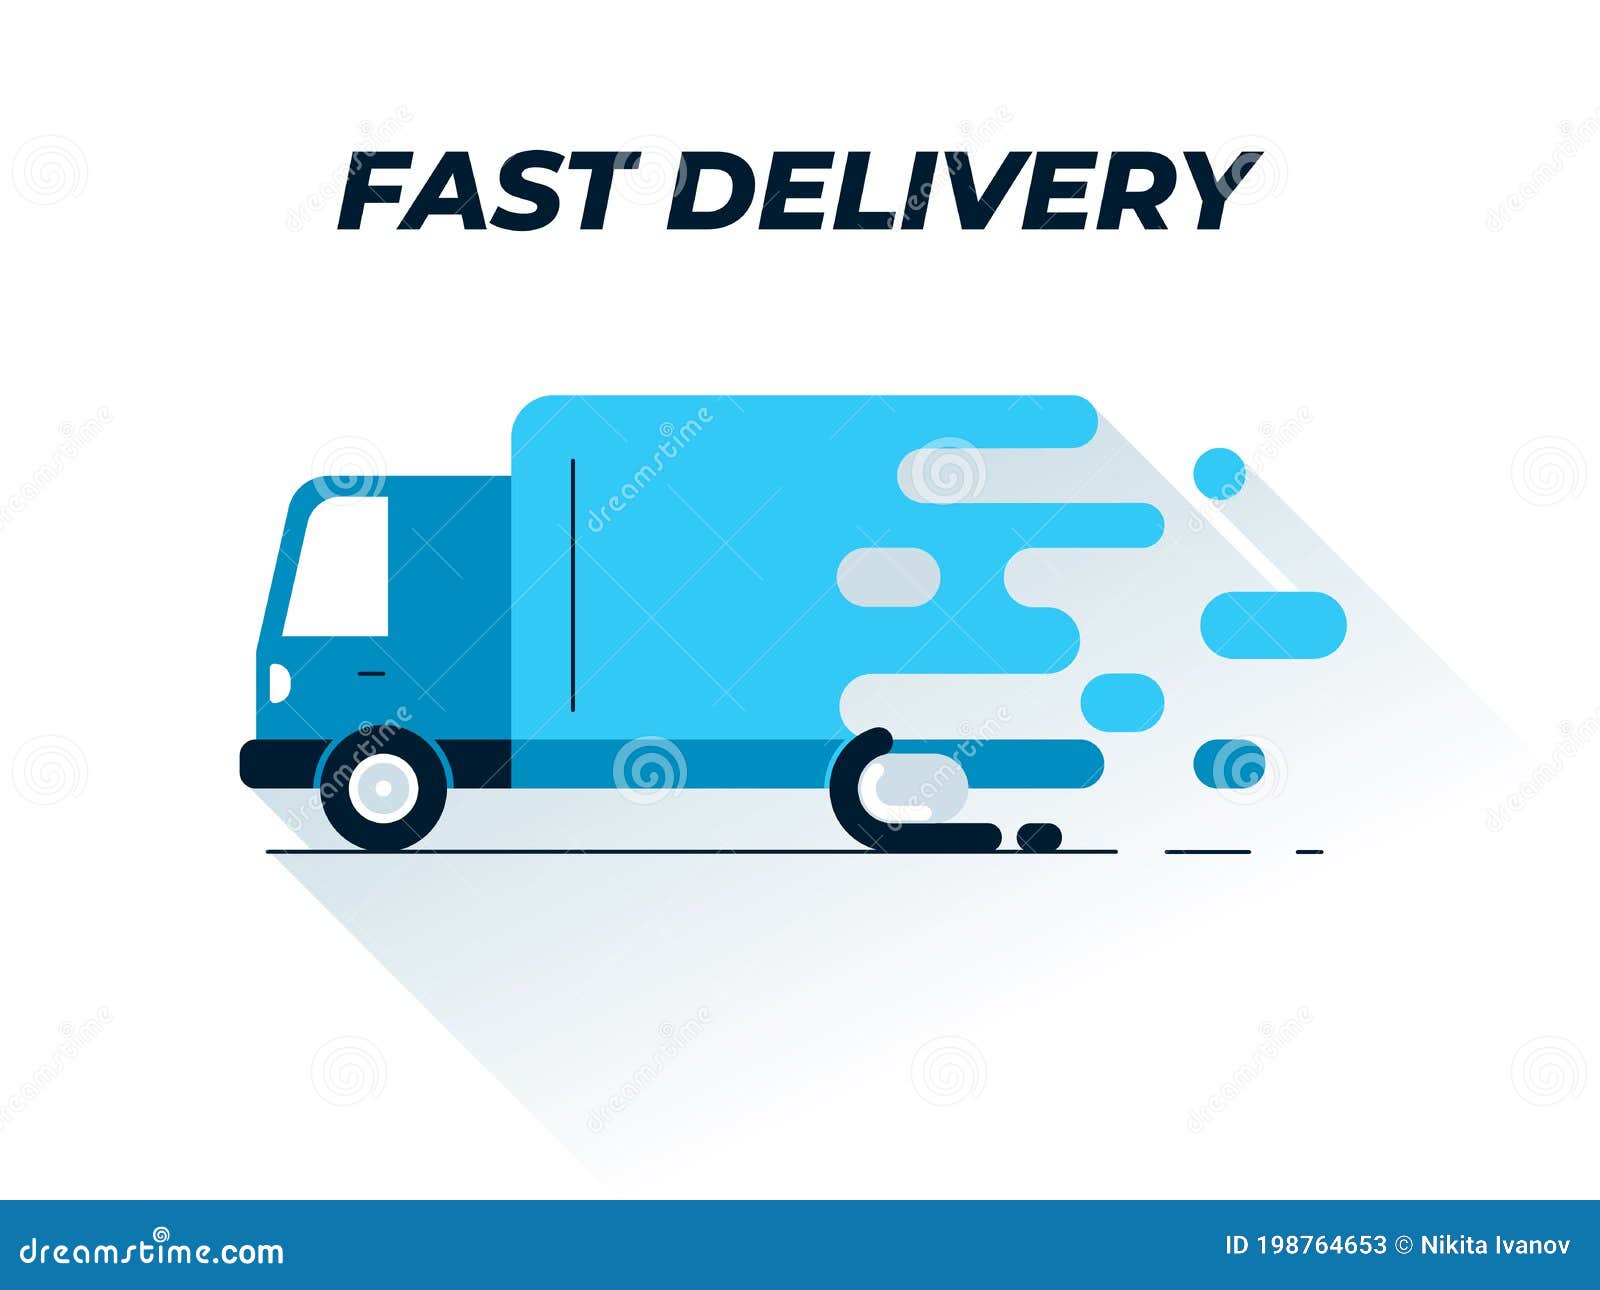 Delivery Truck Flat Illustration. Creative Vector Illustration of a ...